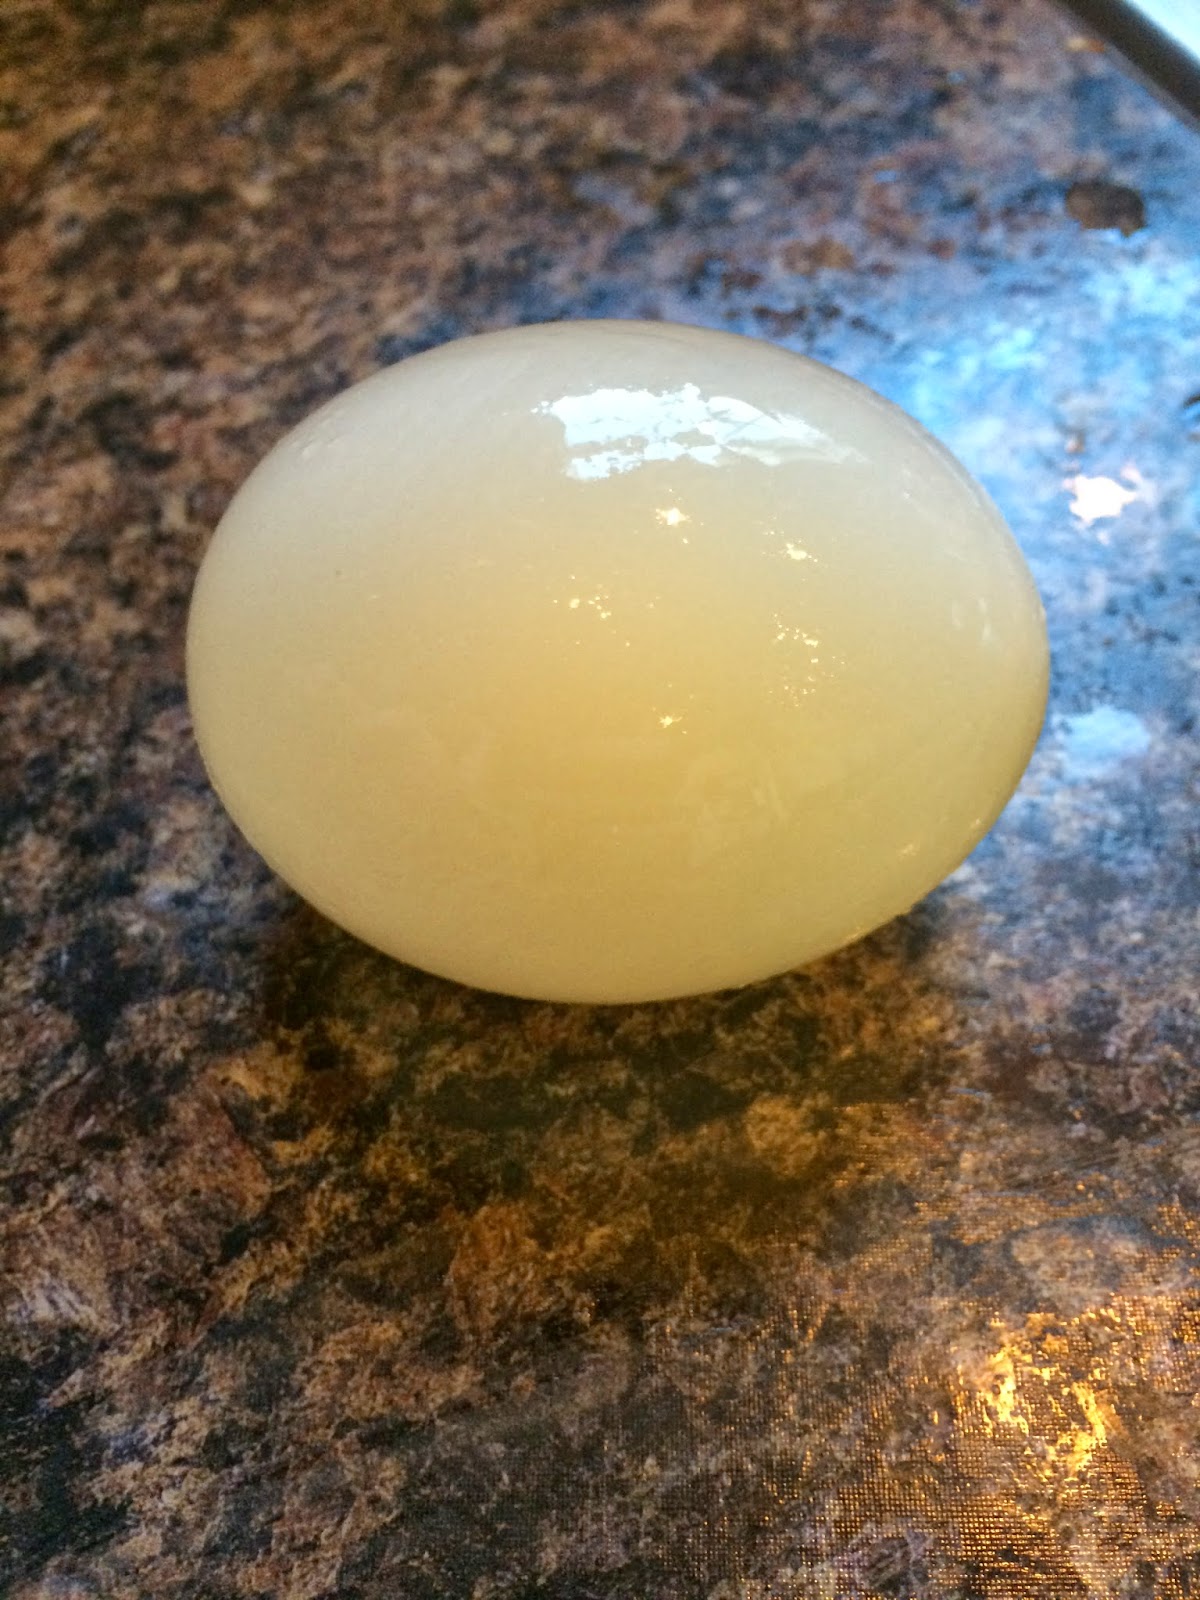 Soak the egg in vinegar and the shell dissolves - NEAT 